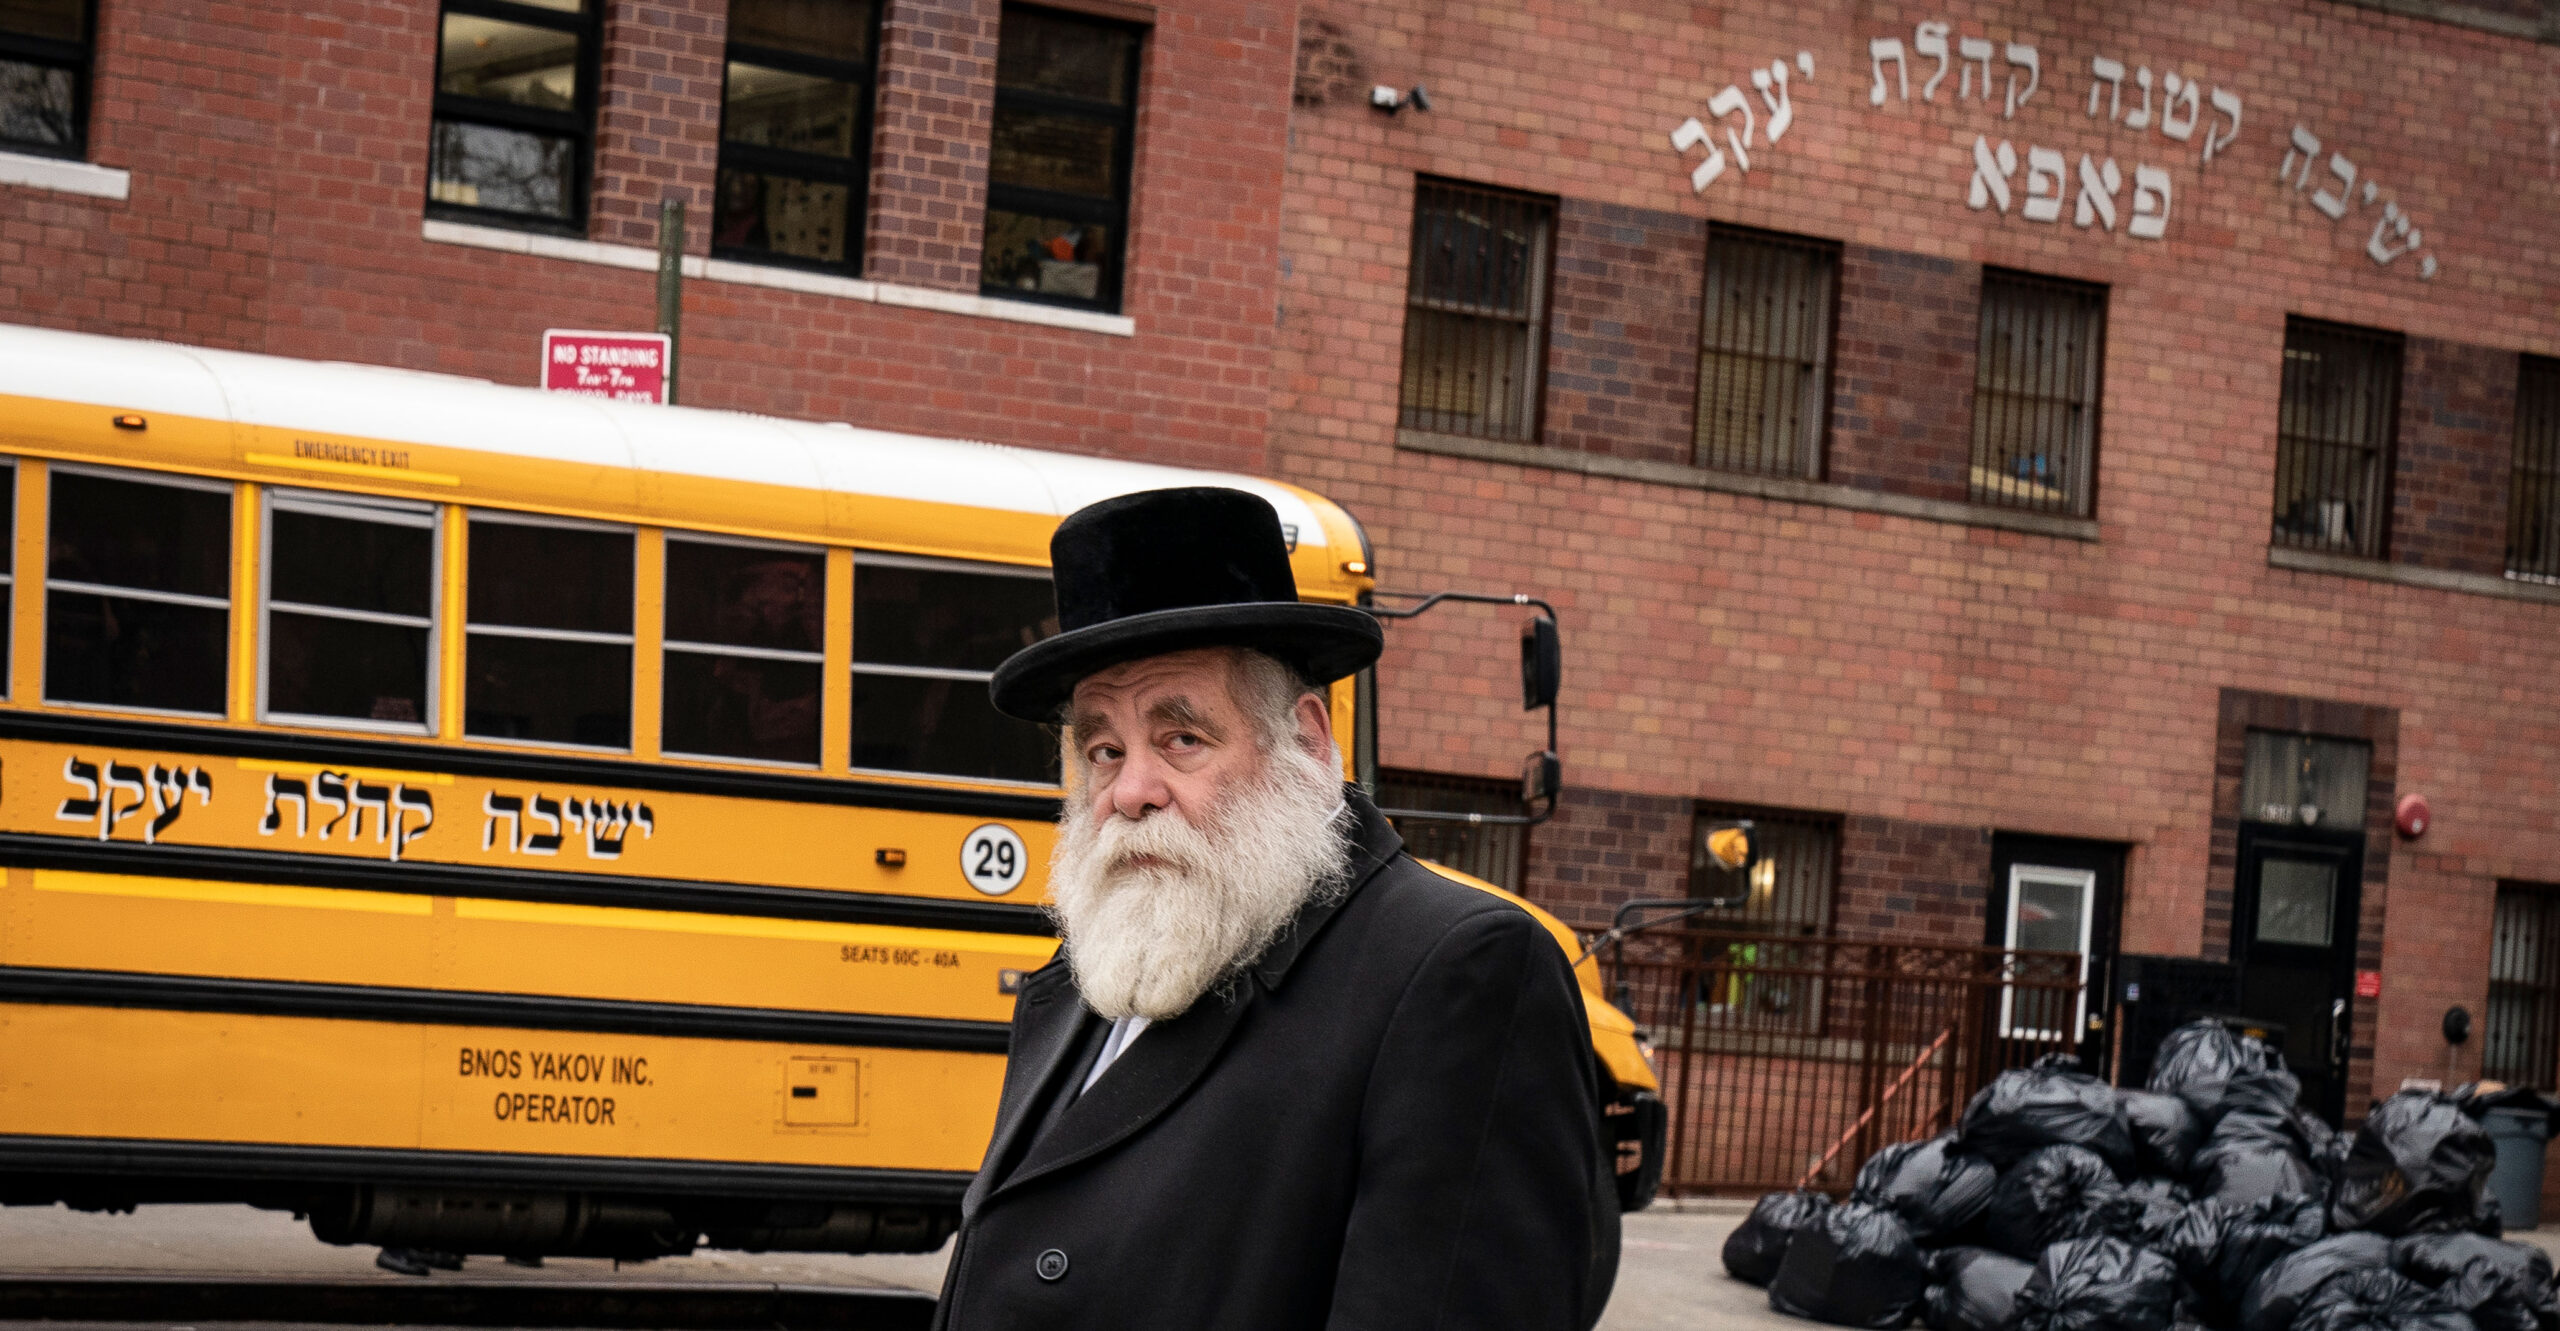 Orthodox Jewish Schools Share Priorities of Most Americans, Regardless of What NY Times Says